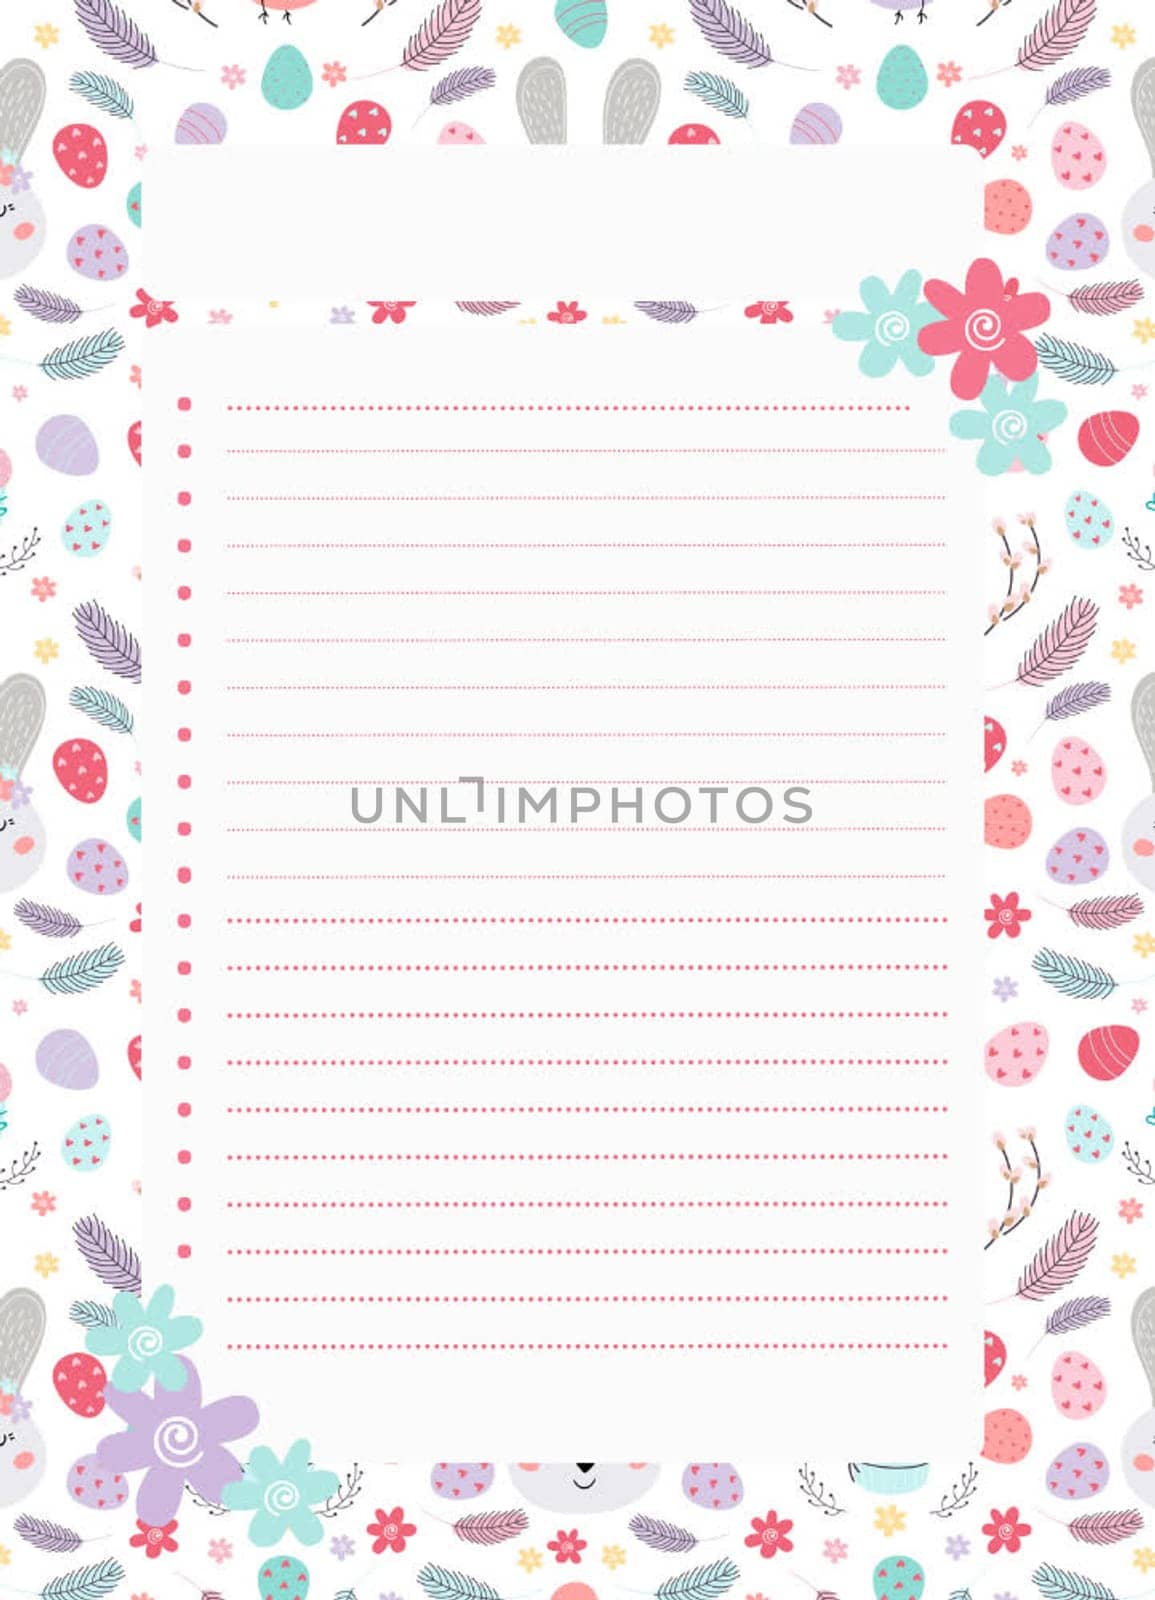 A colorful flowery background with a white frame. The flowers are pink, purple, and green